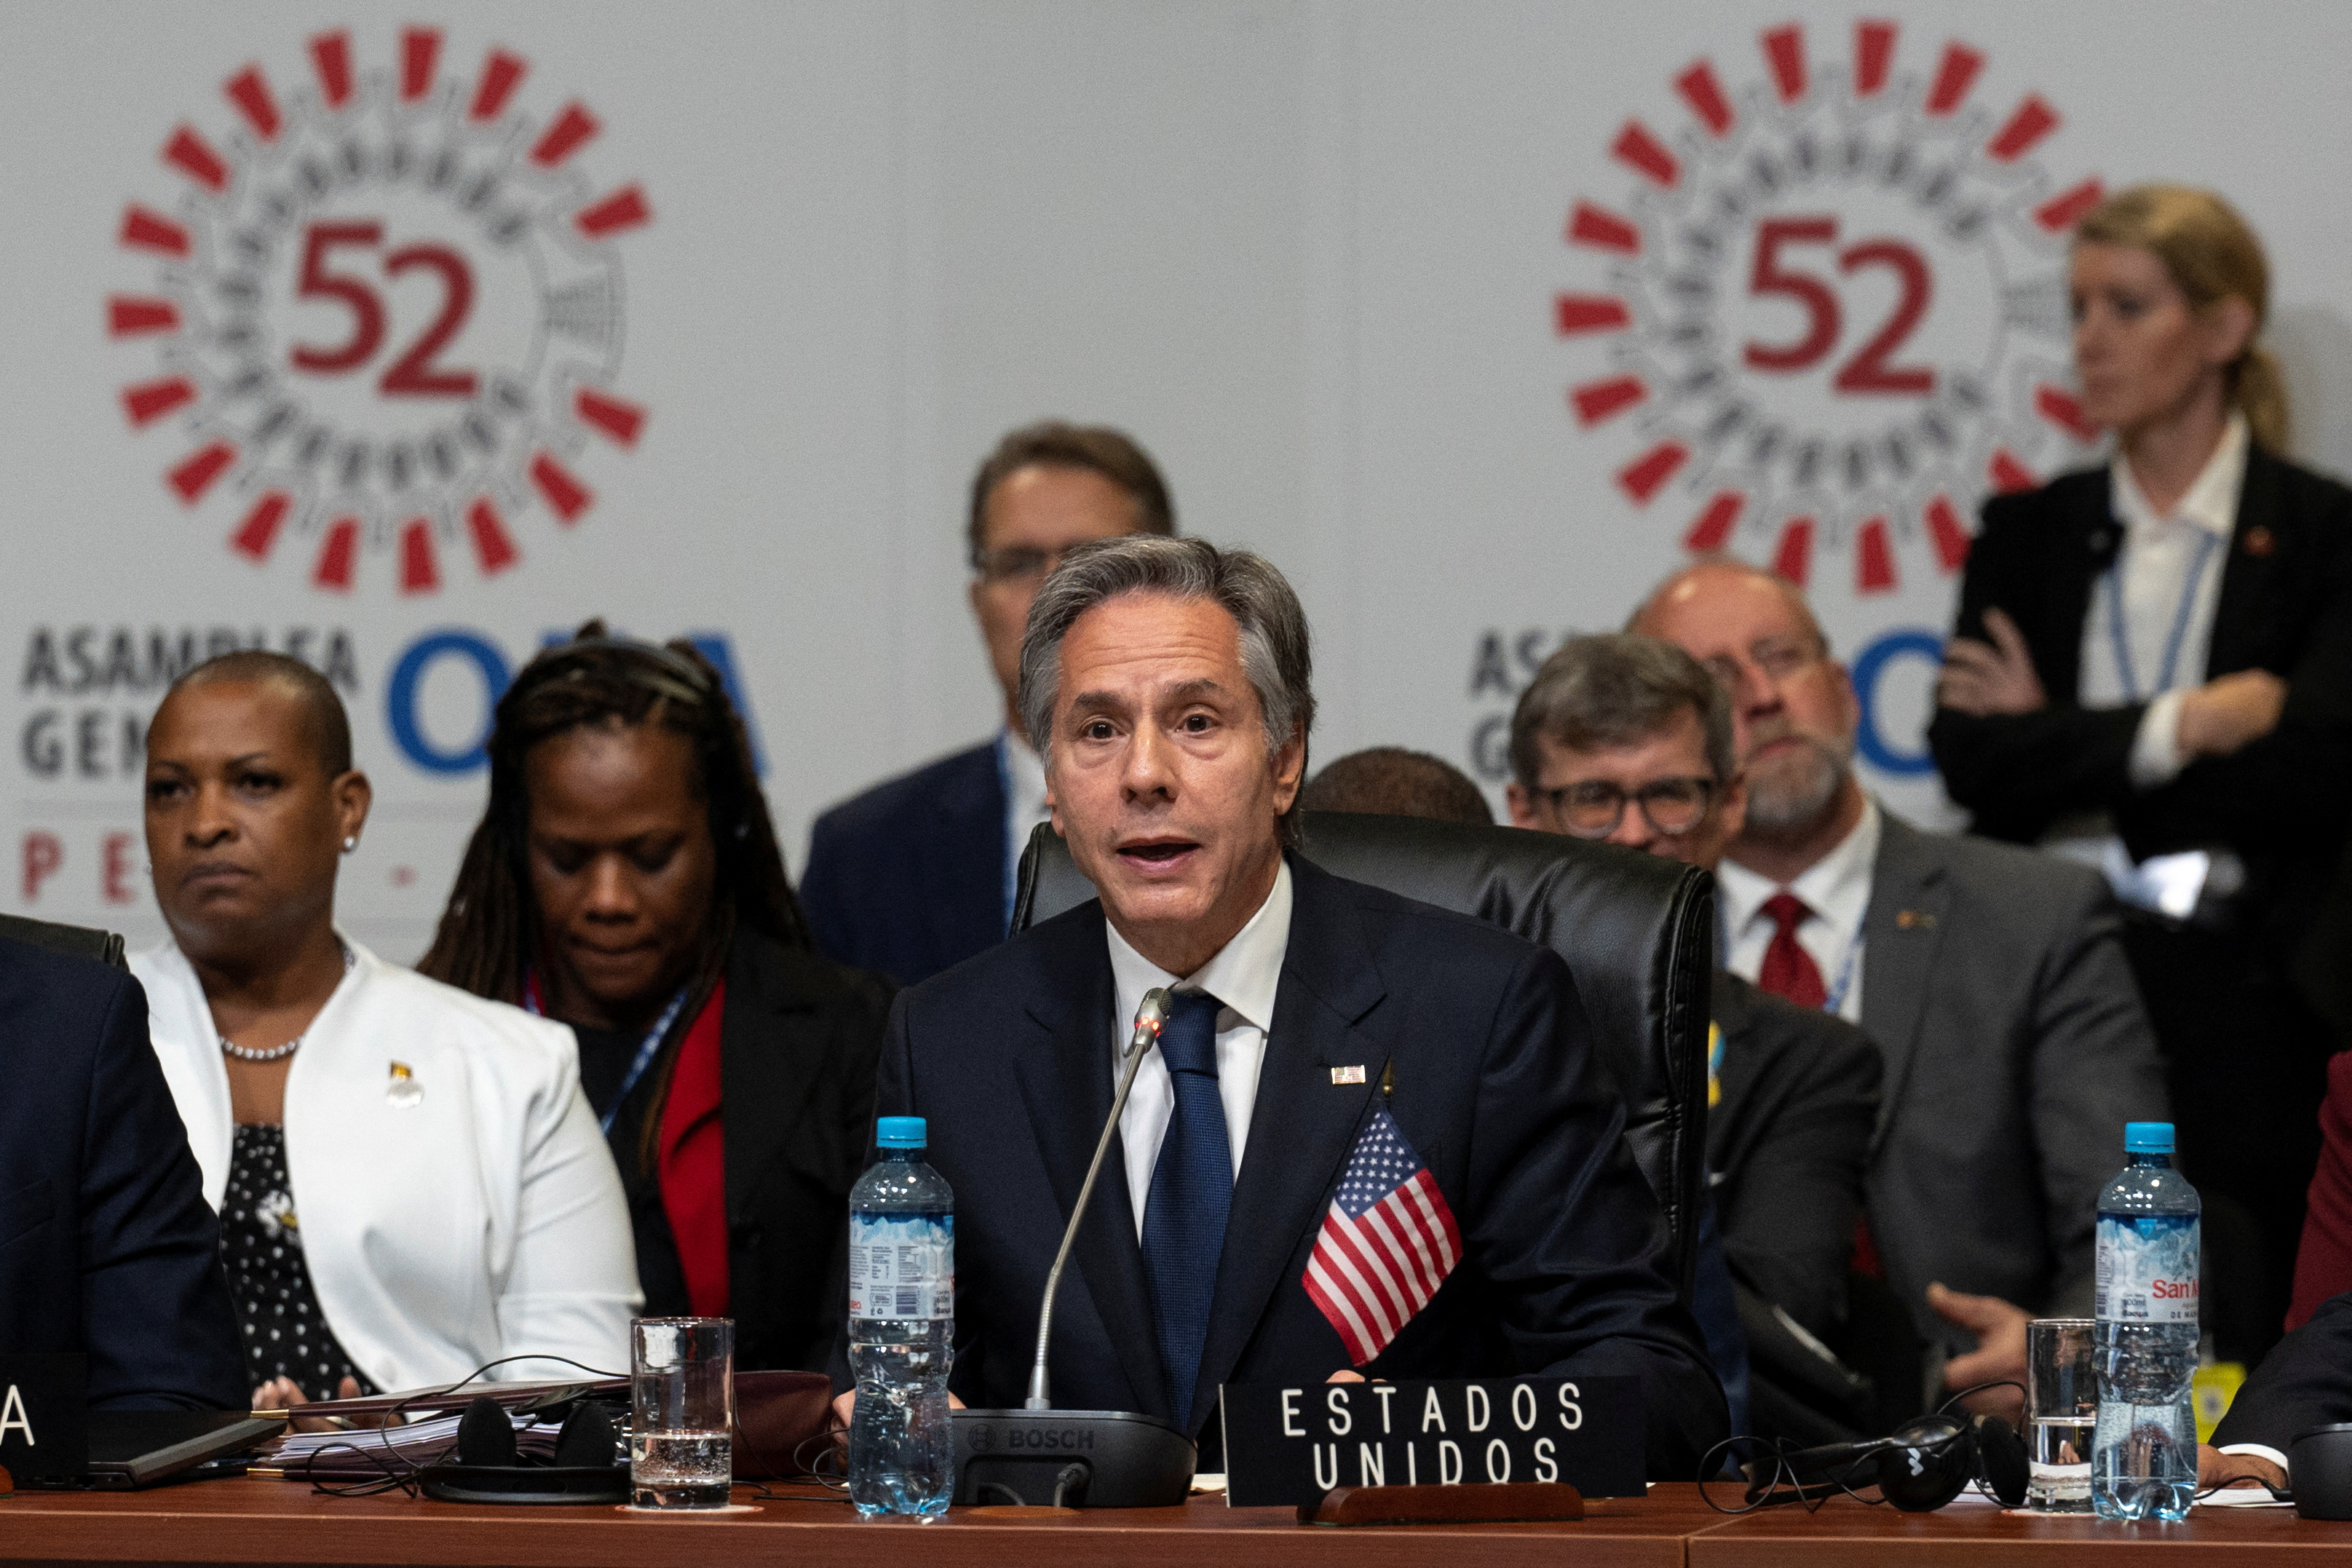 U.S. Secretary of State Antony Blinken speaks during the 52nd General Assembly of the Organization of American States (OAS) in Lima, Peru on October 6, 2022. Cris BOURONCLE/Pool via REUTERS